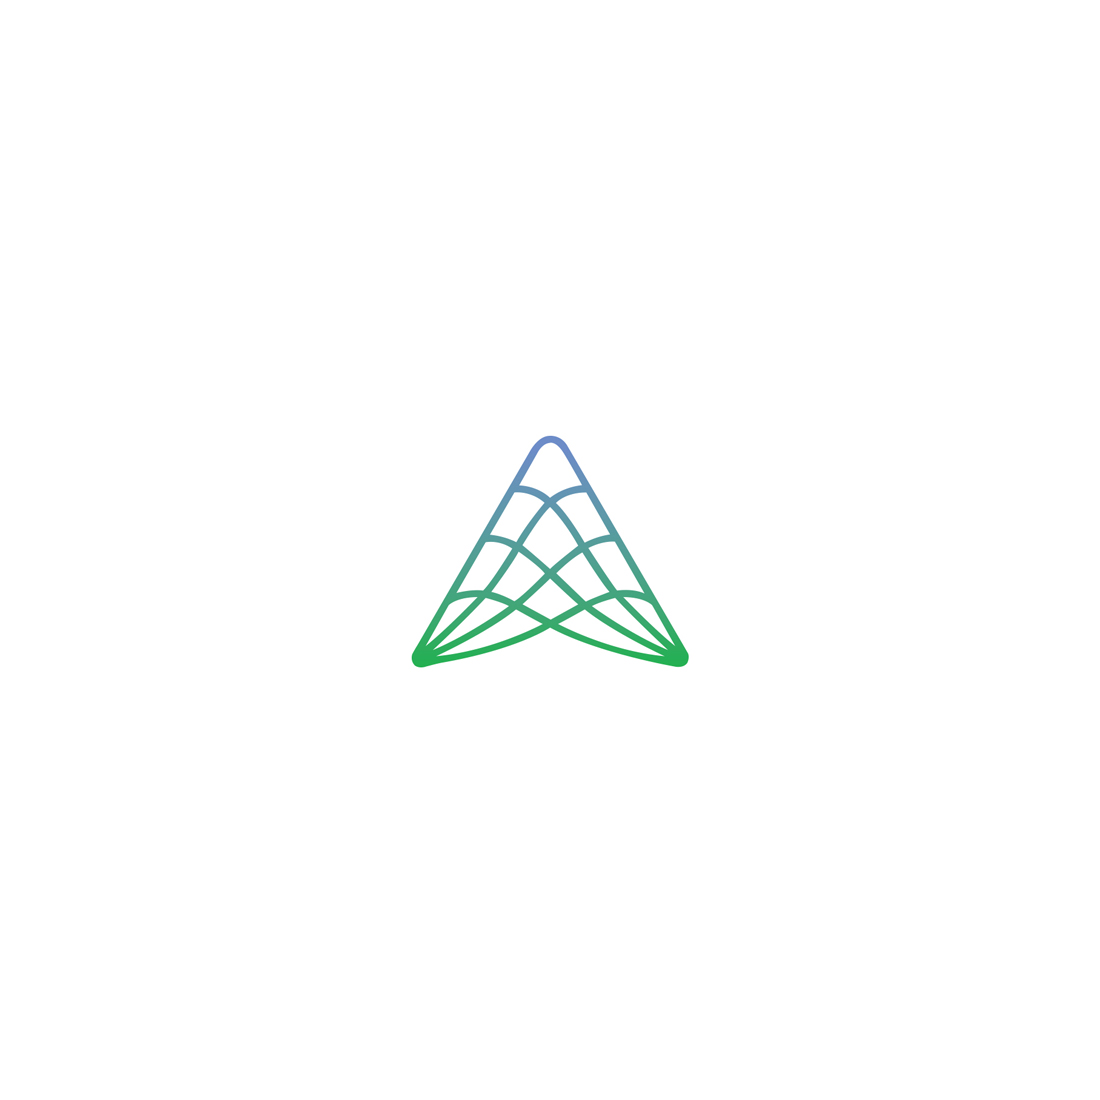 Picture of a triangle on a white background.